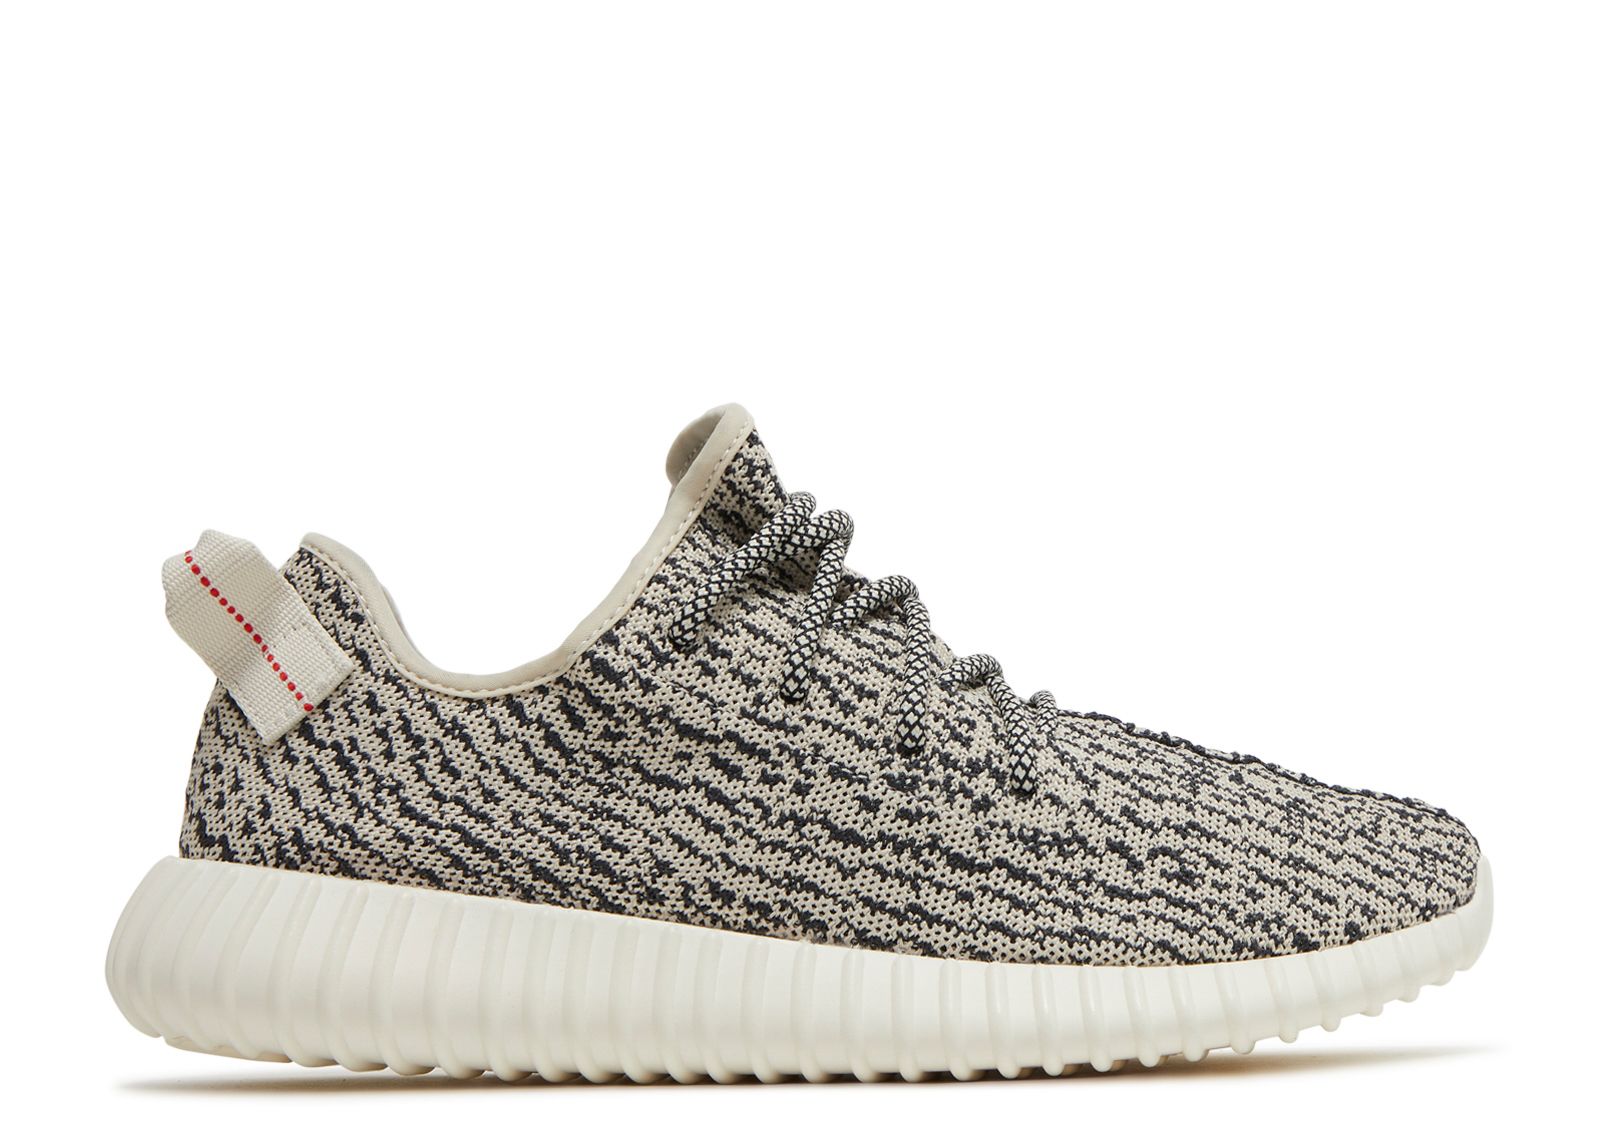 Yeezy Boost 350 Turtle Dove for cheap! / Review Comparison